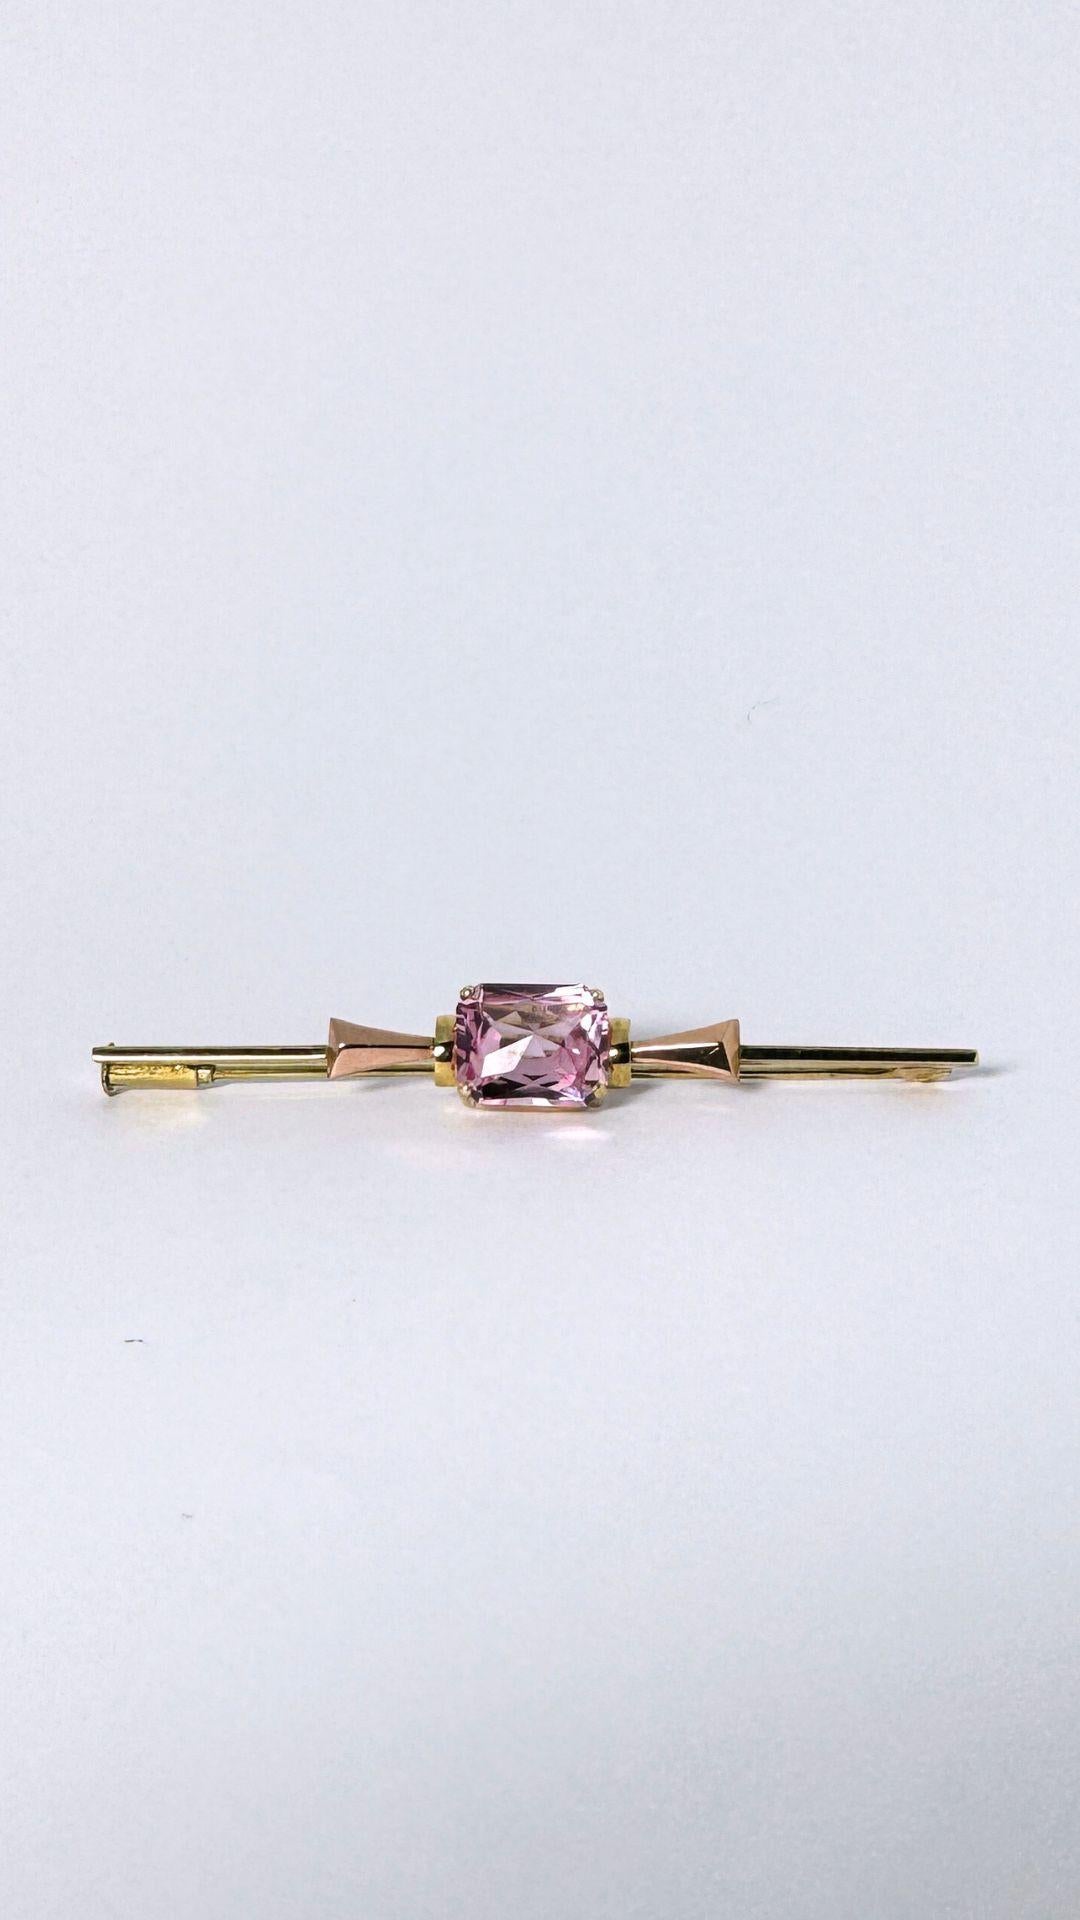 Vintage European pin, 14 carat yellow gold, with amethyst, rose de france In Good Condition For Sale In Heemstede, NL